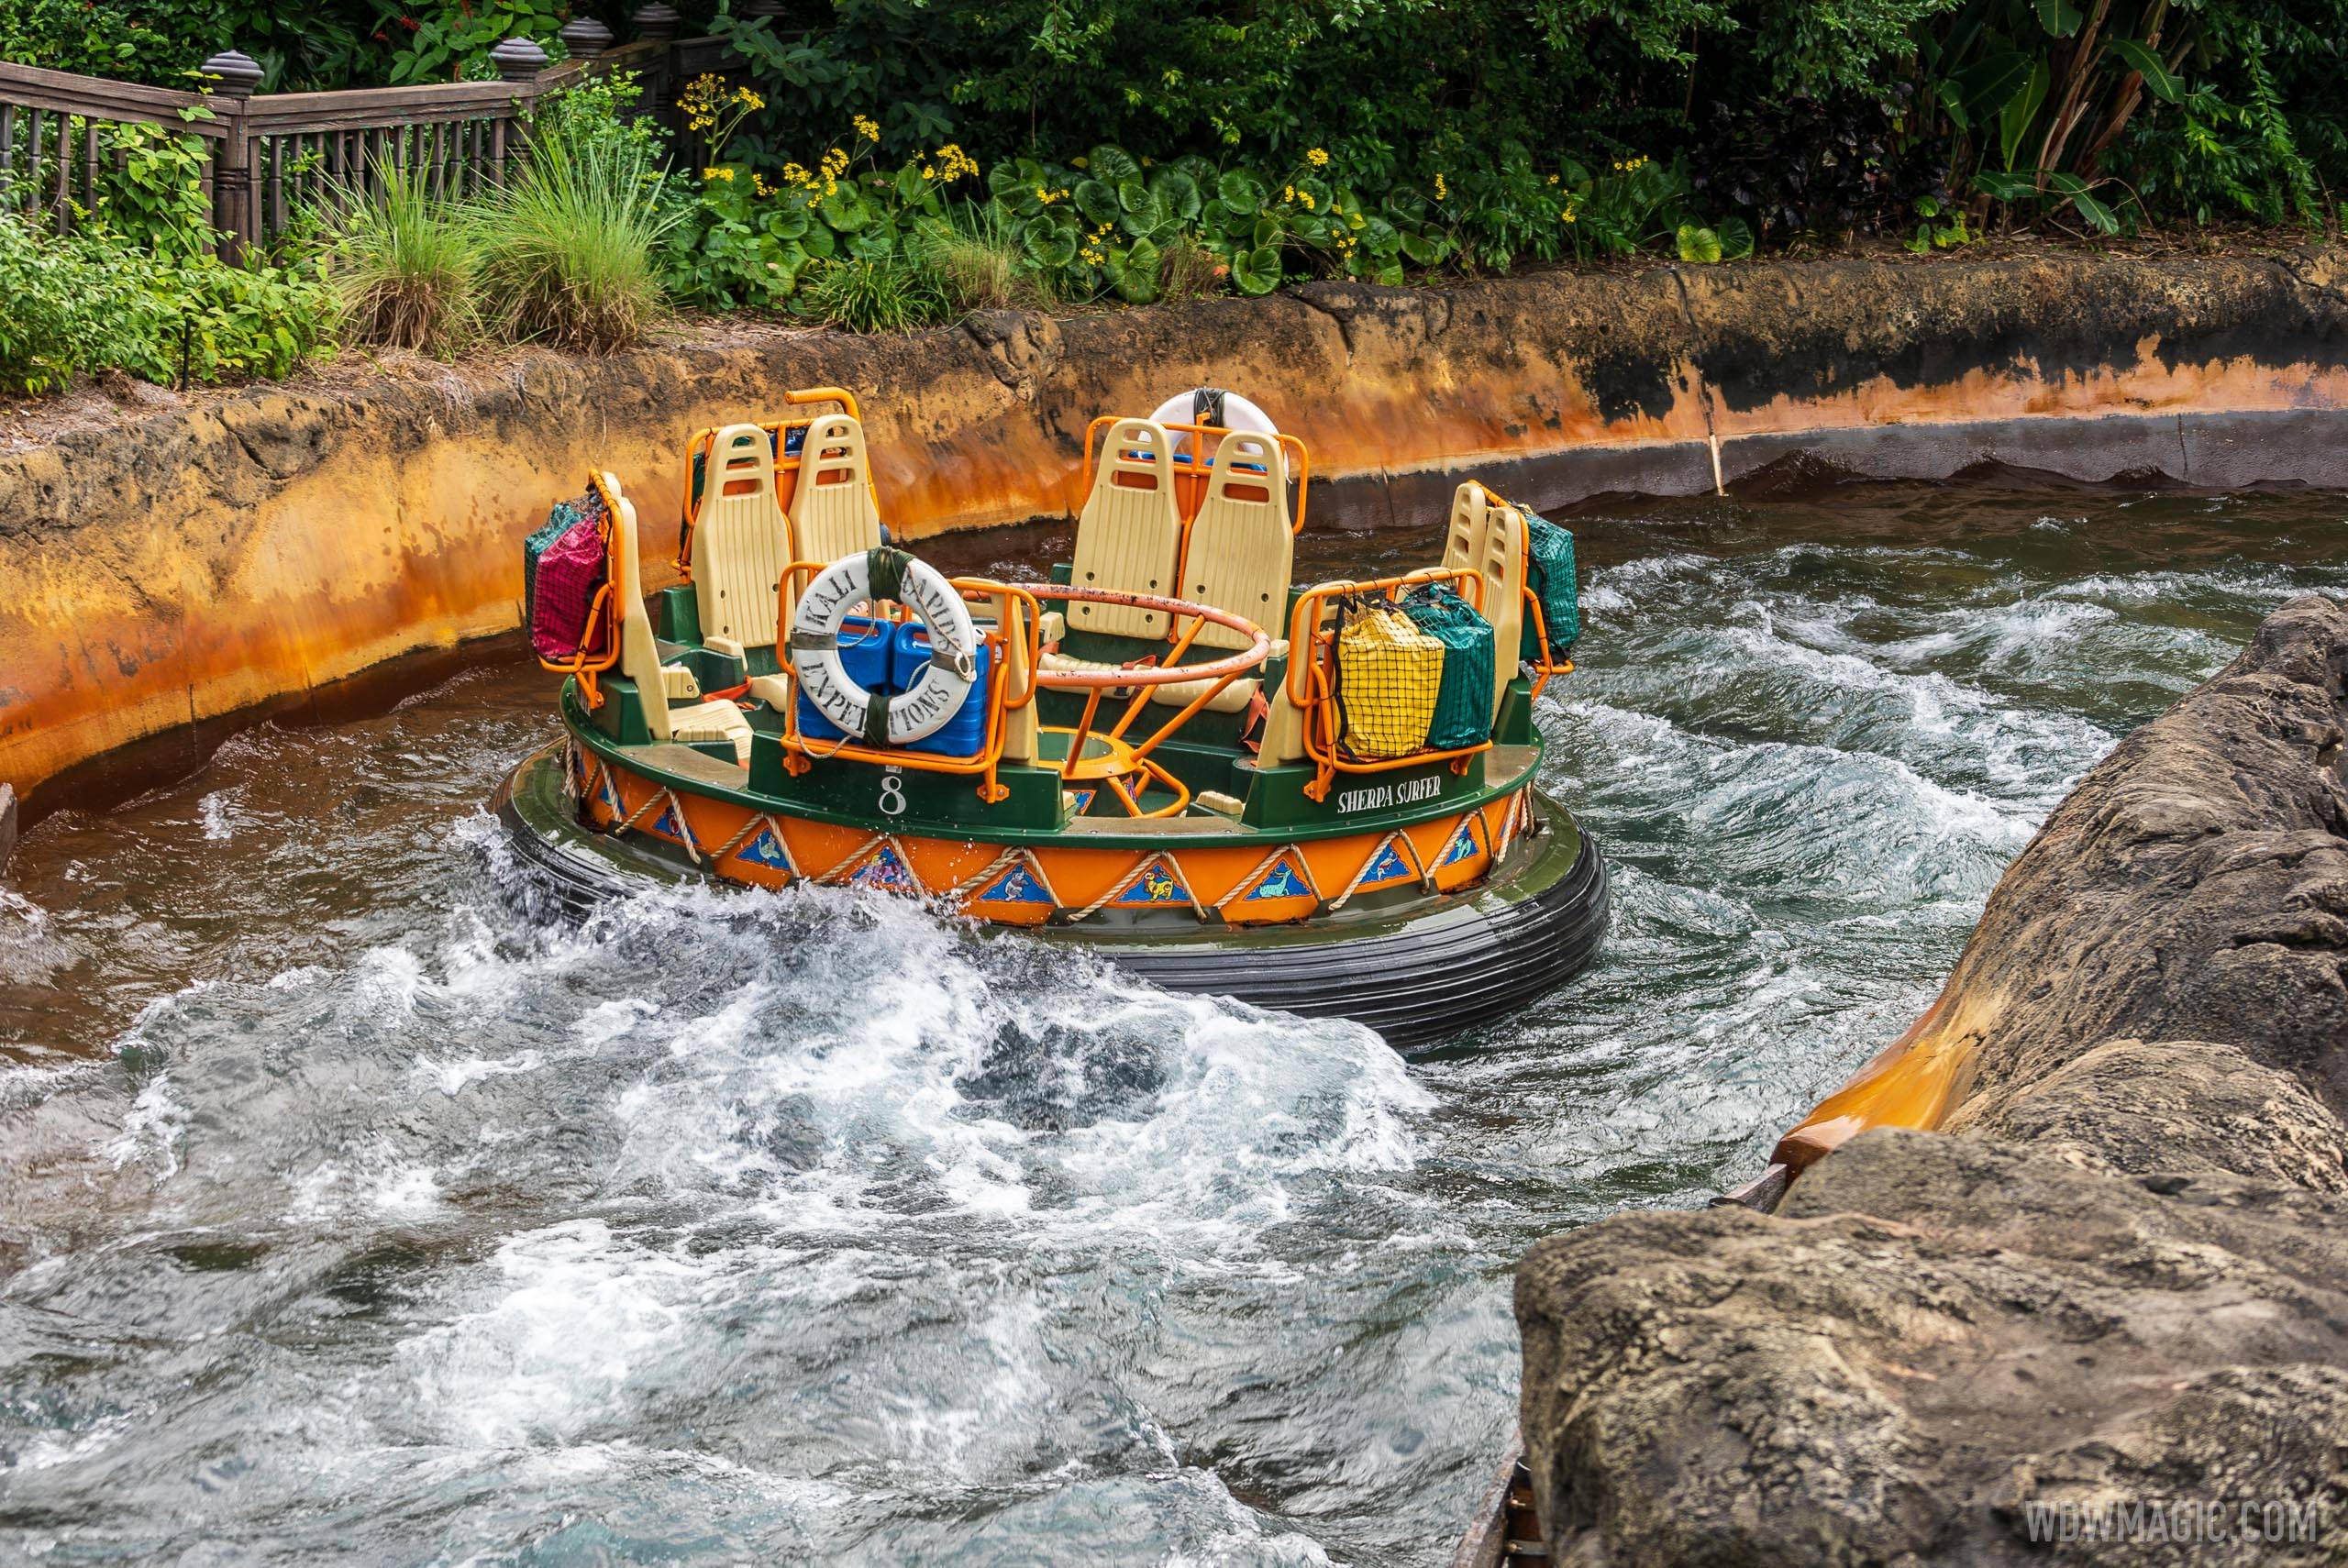 Kali River Rapids scheduled for refurbishment in the new year